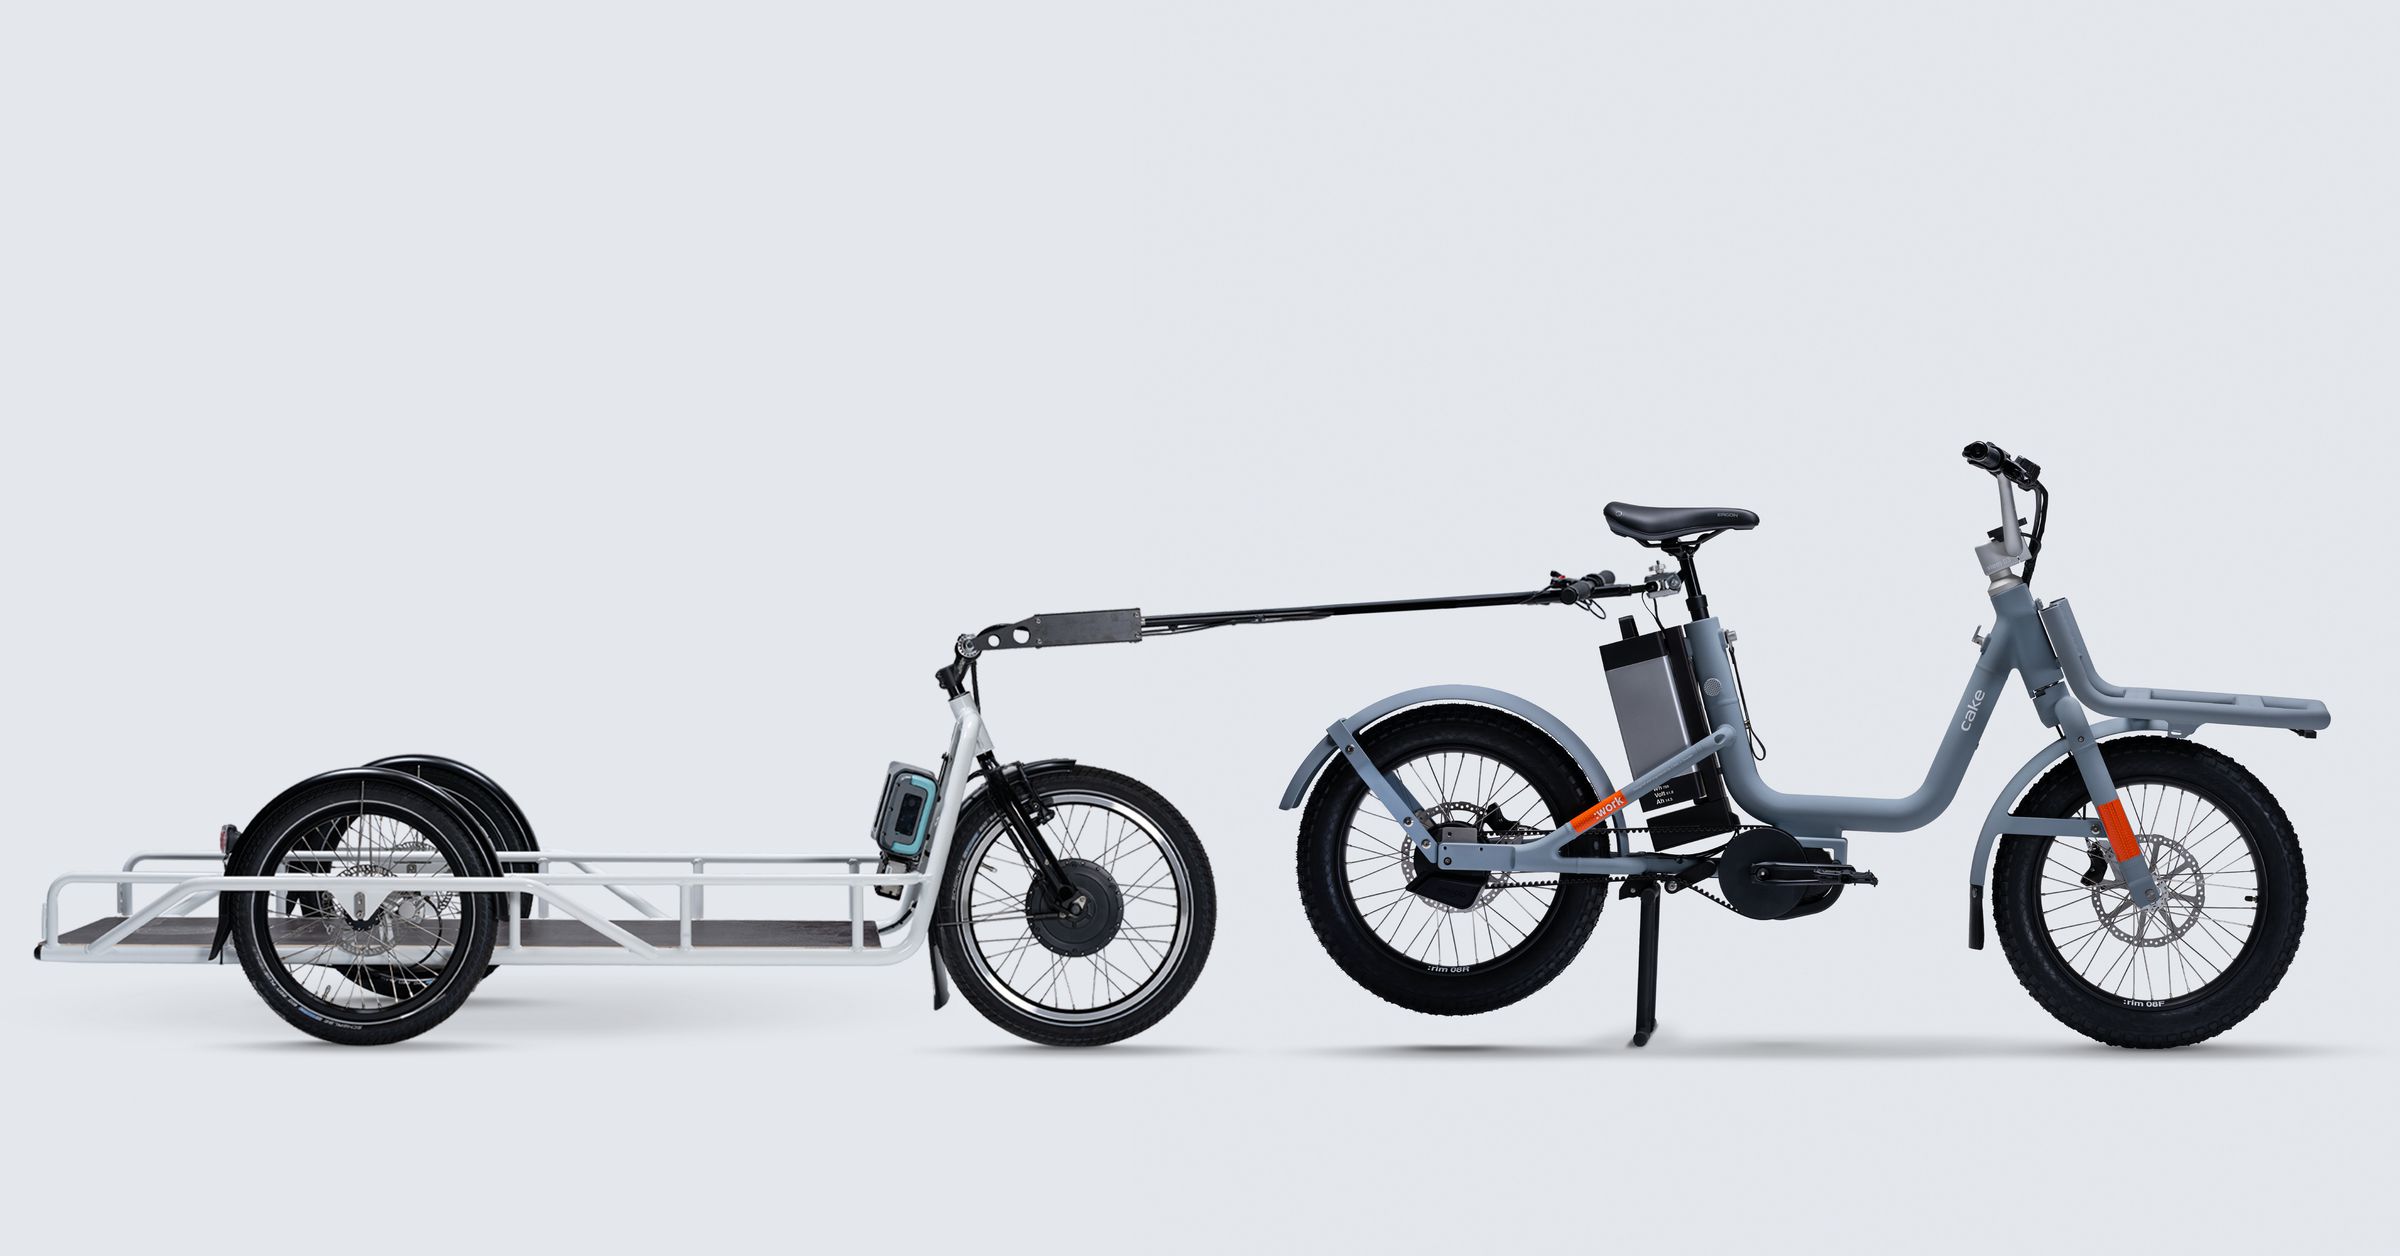 This e-bike is endlessly configurable.